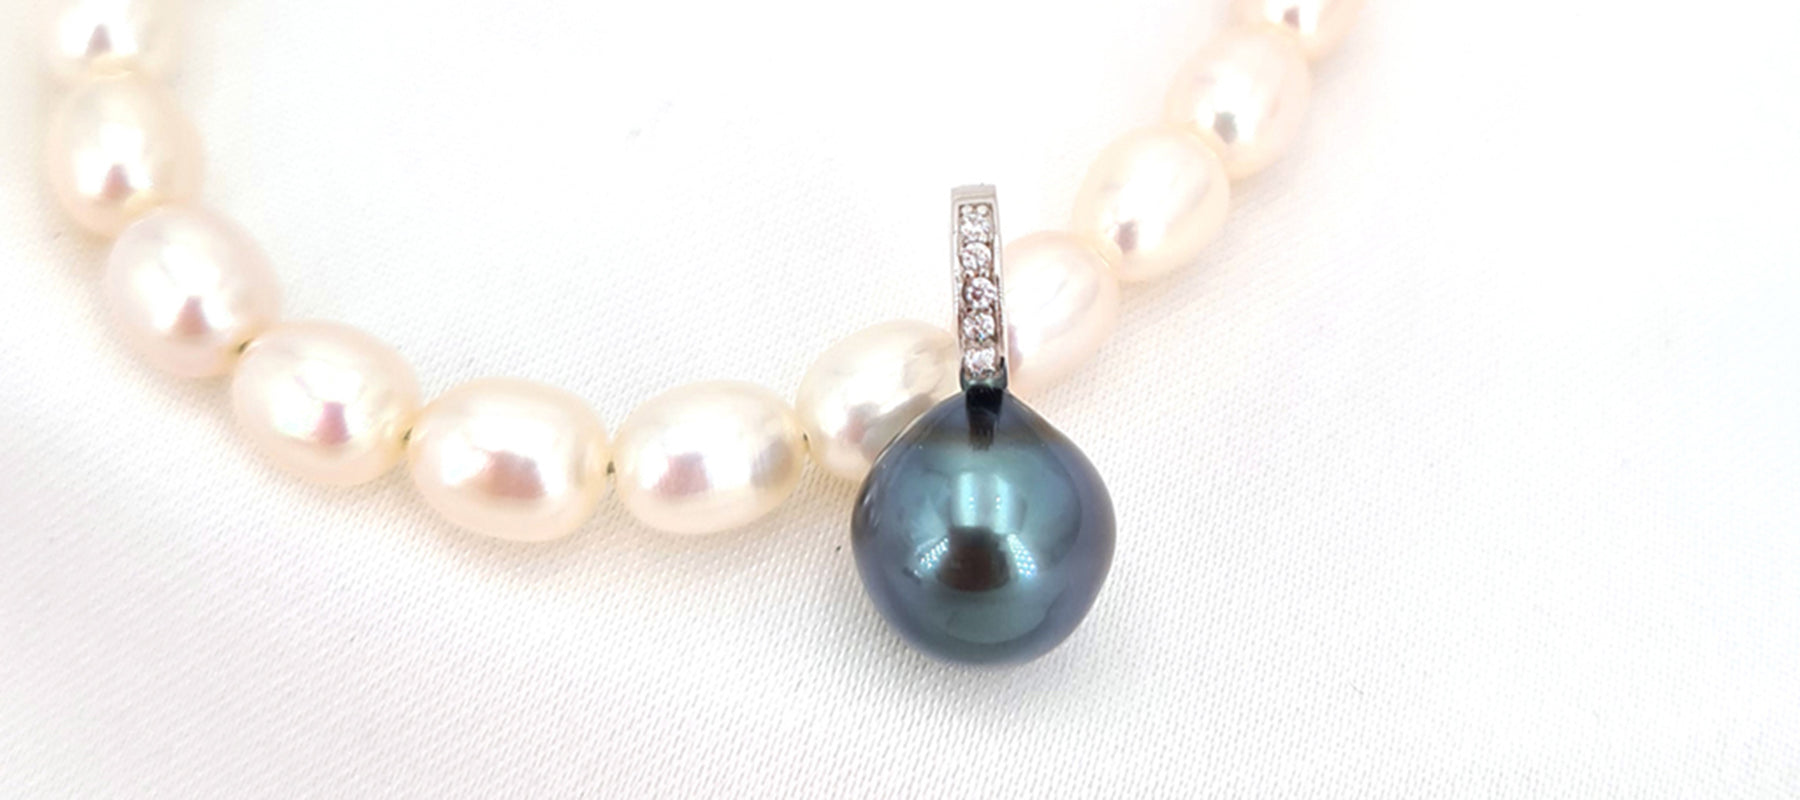 Tahitian Pearl Jewelry | Saltwater Tahitian Pearl Necklace and Earrings